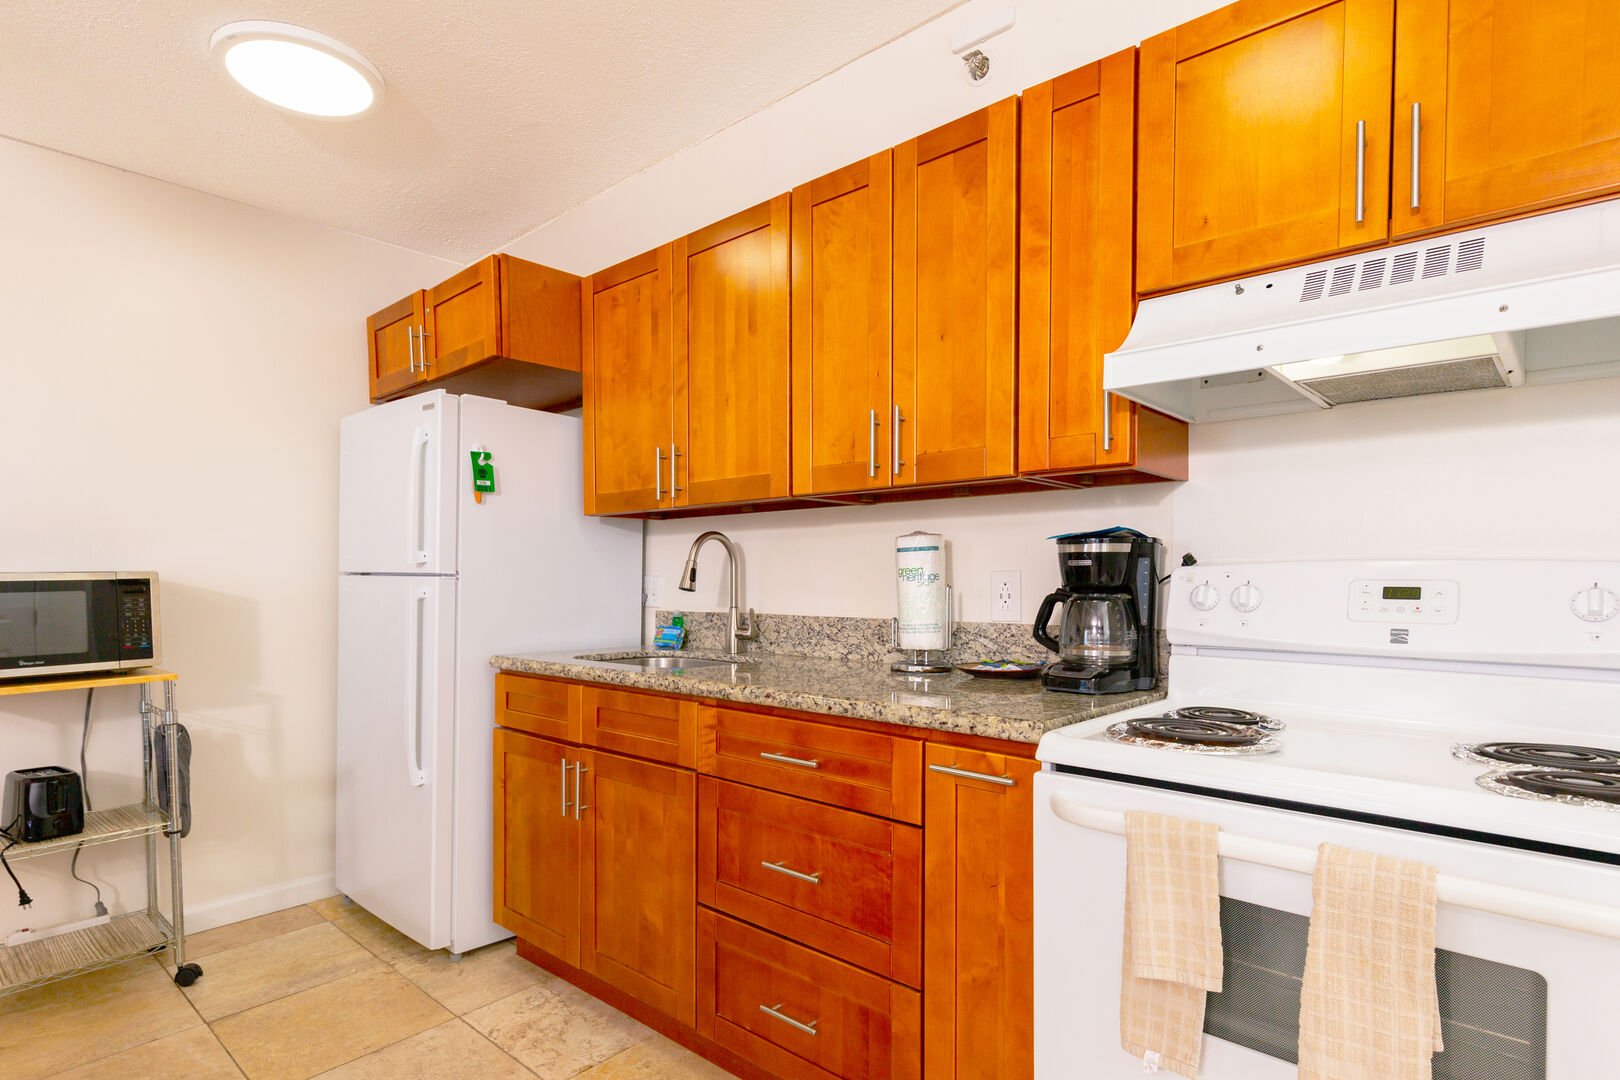 Fully equipped kitchen with full-size appliances